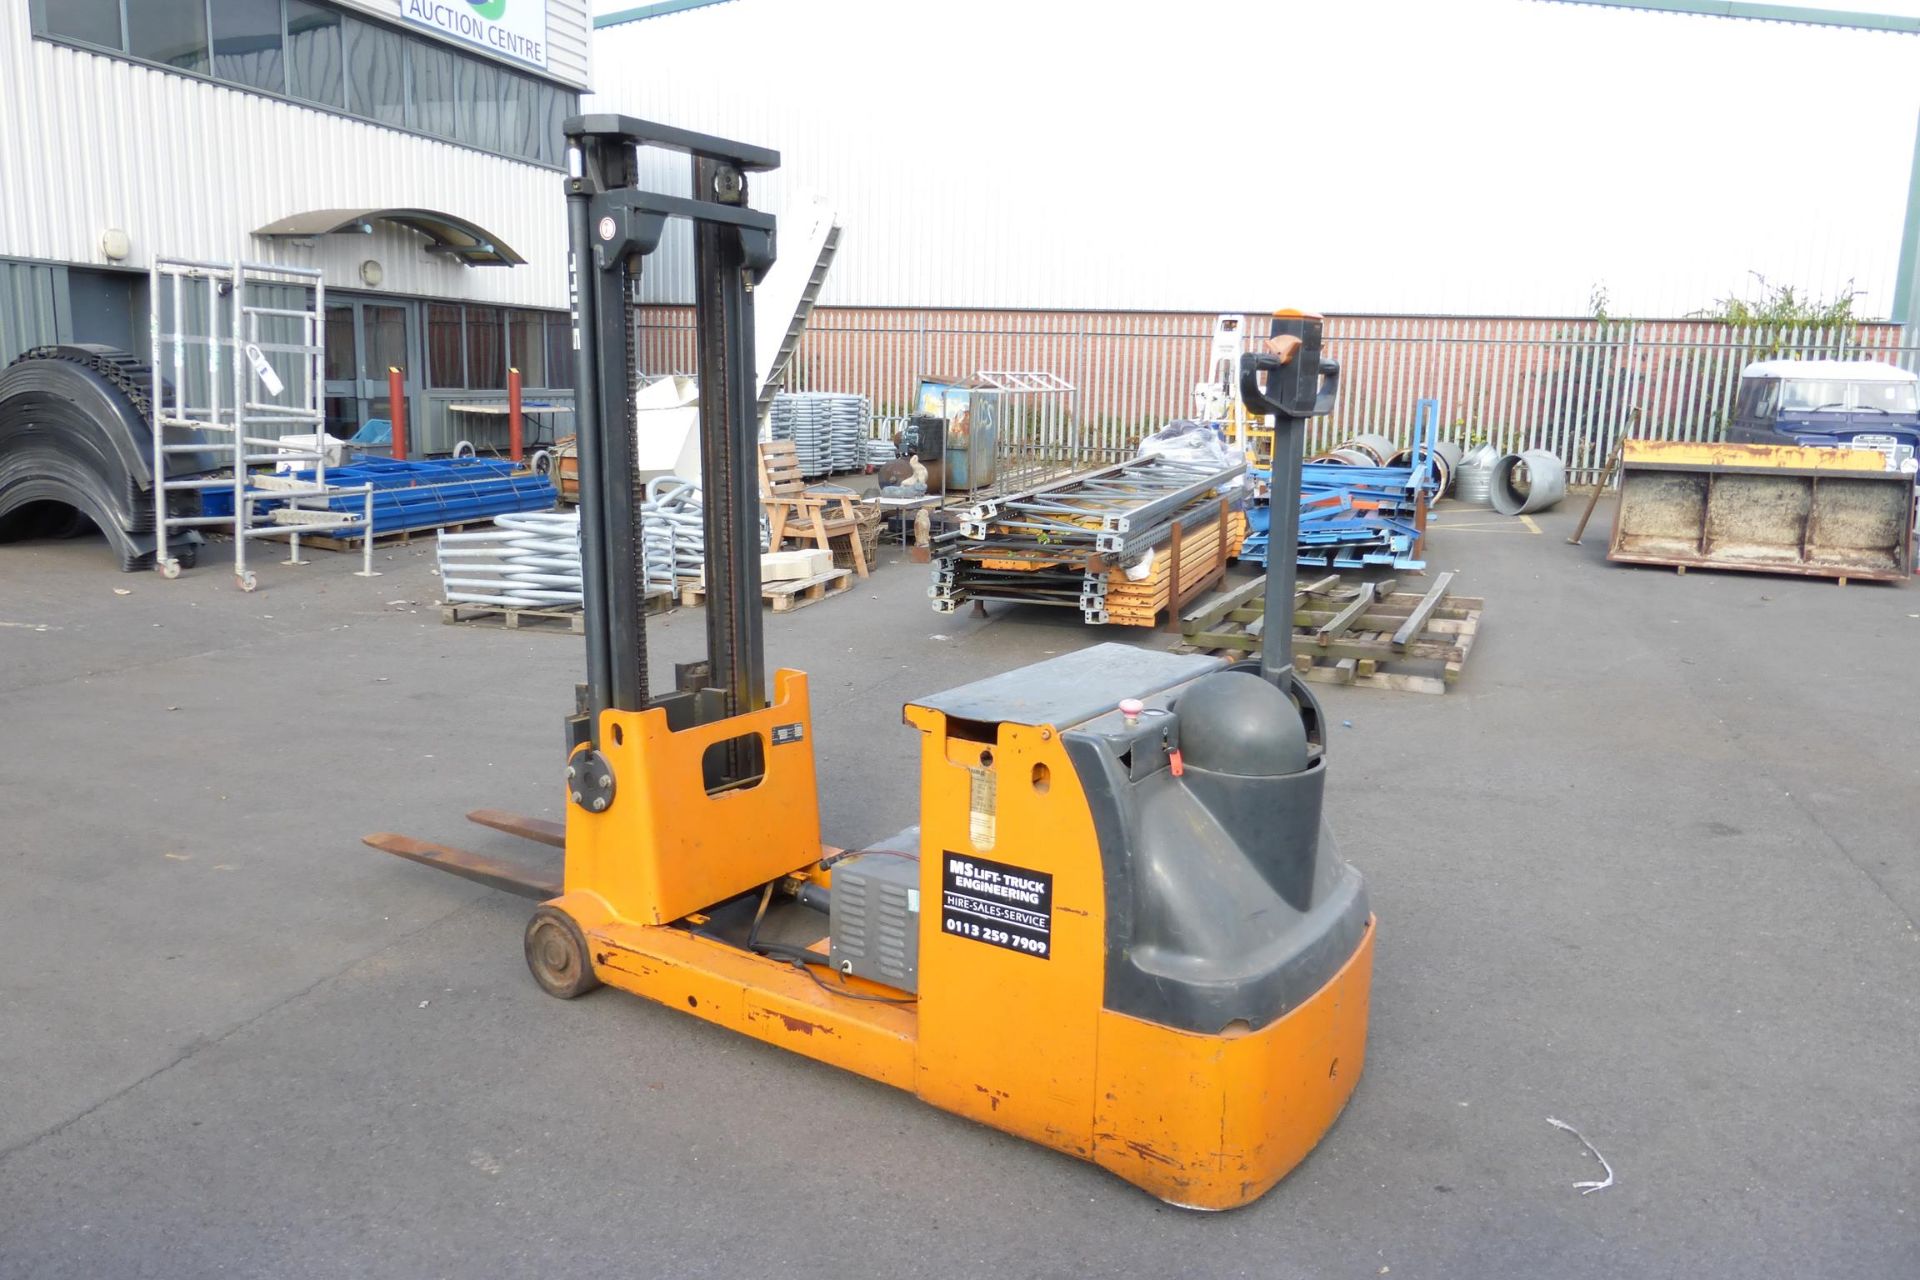 * Still EGG 16 Electric Pedestrian Operated Pallet Truck Max Capacity 1350Kg c/w charger (Spares - Image 2 of 5